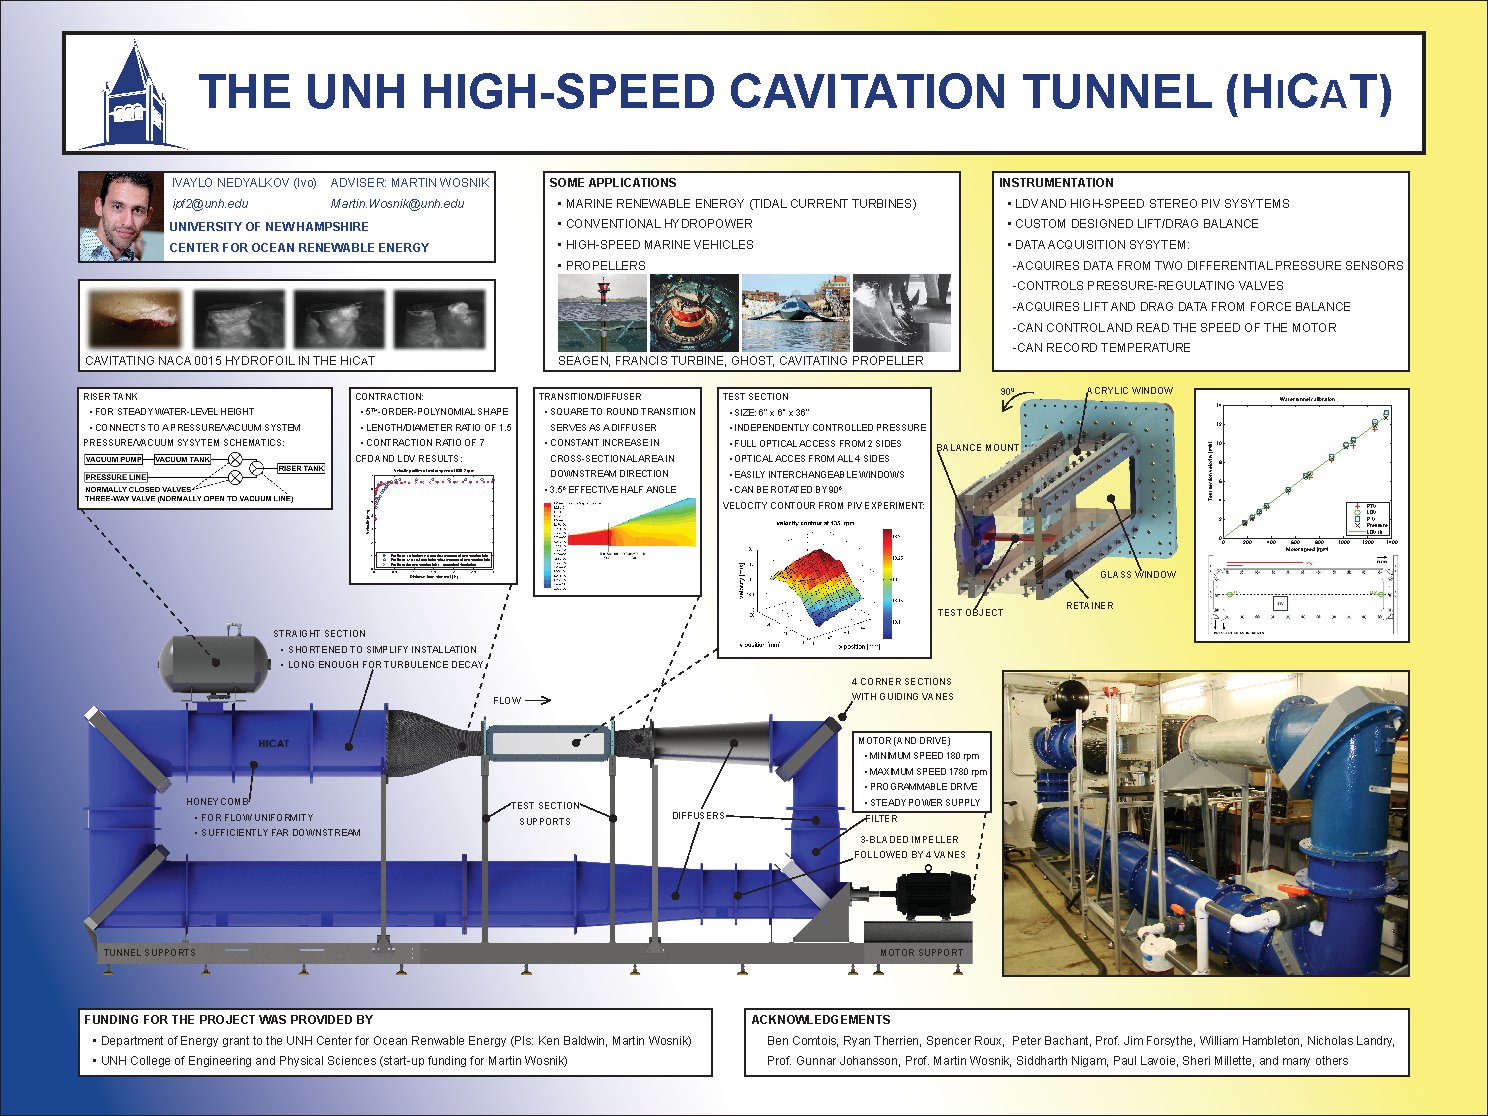 The Unh High-Speed Cavitation Tunnel (Hicat) - A New Look Into Water Flows by ivaylo